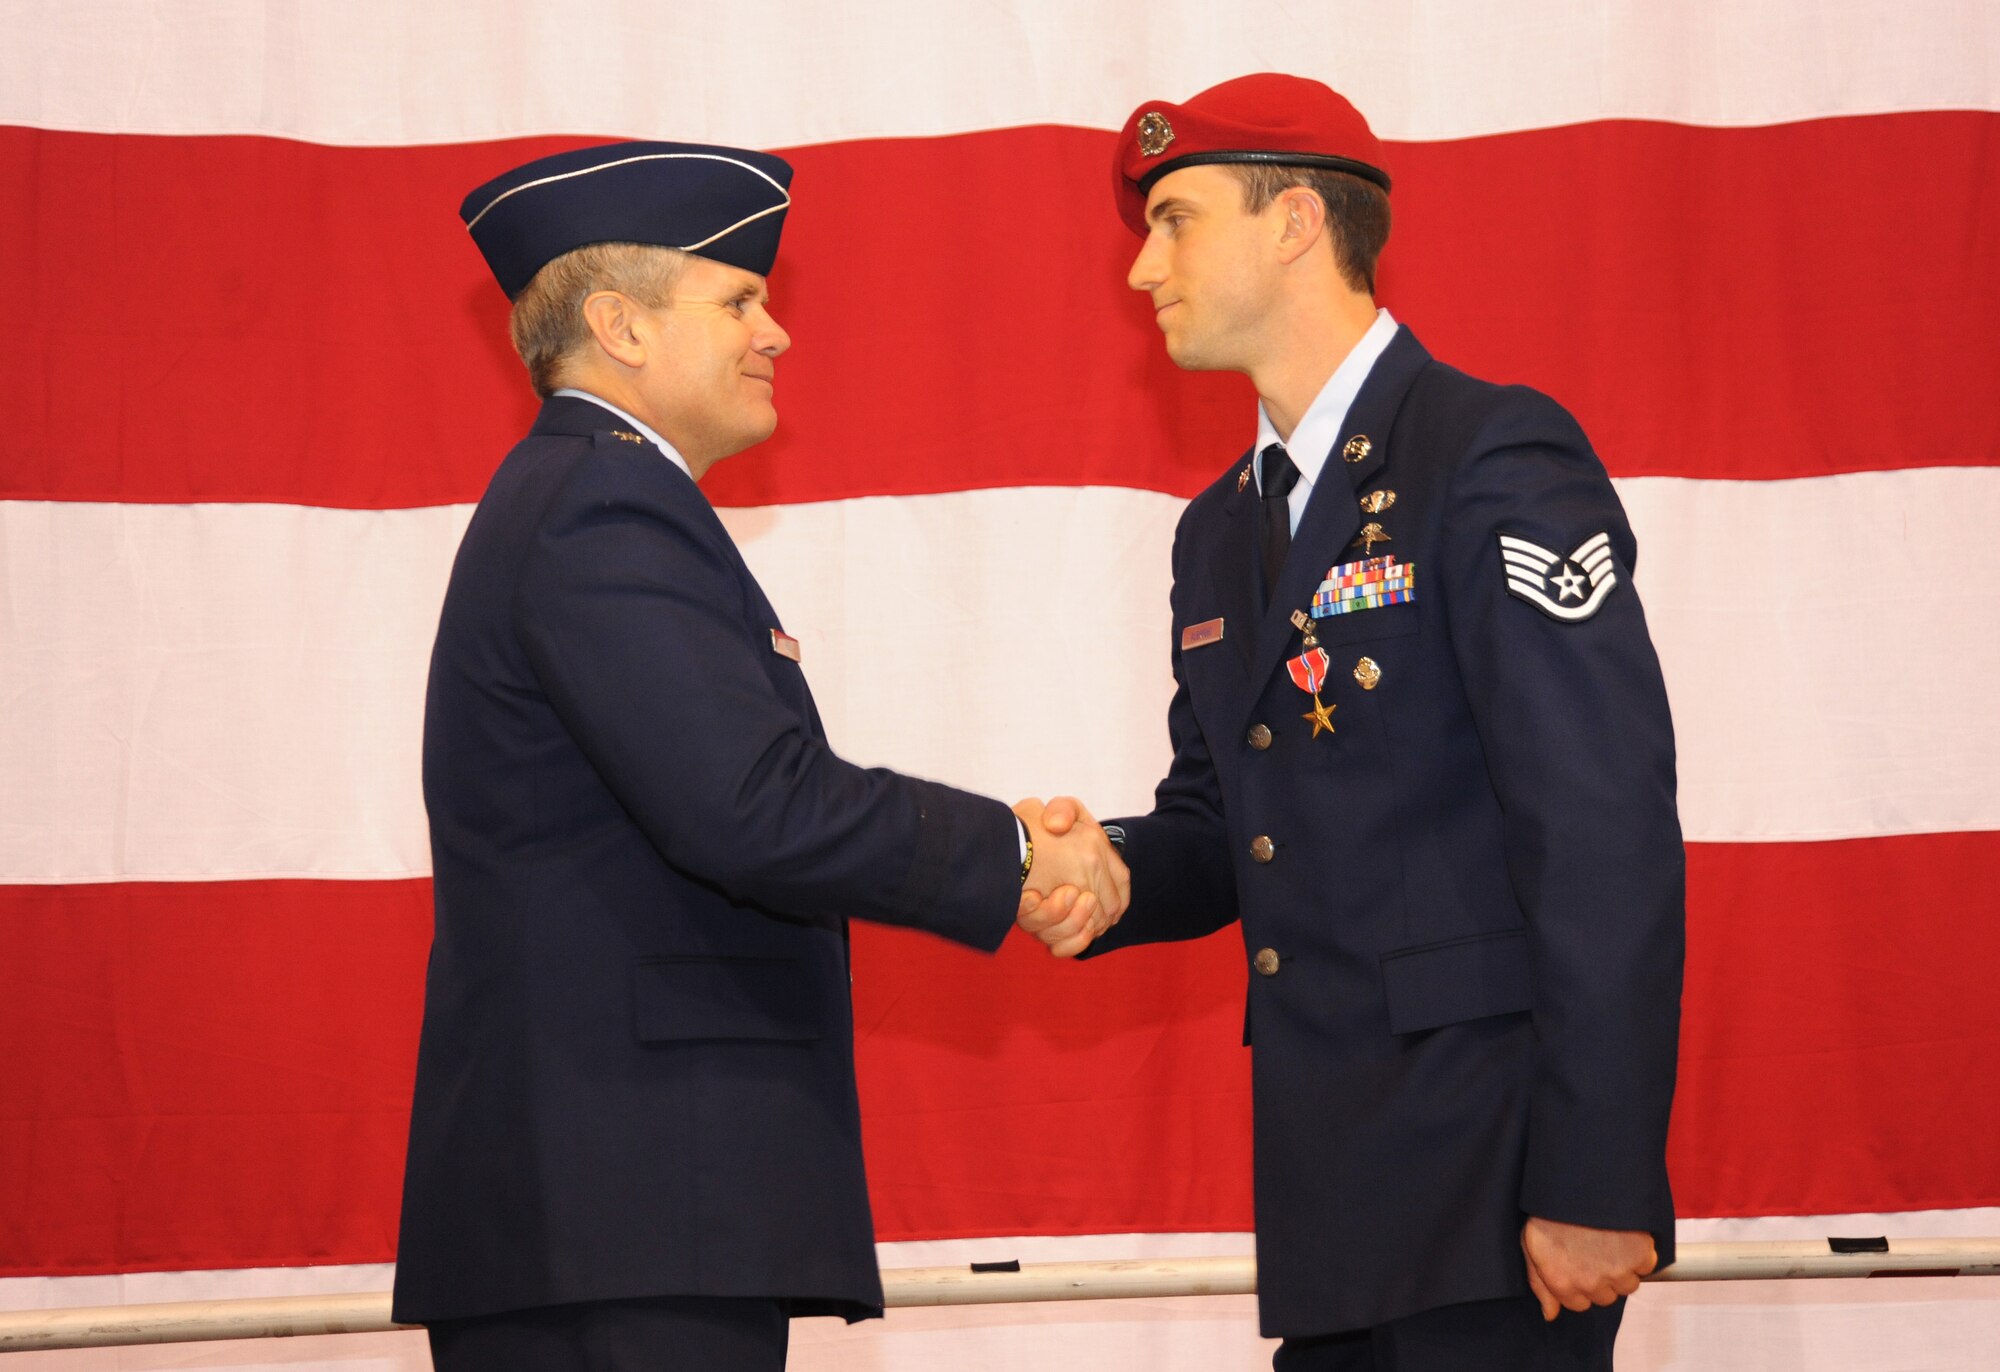 U.S. Air Force Lt. Gen. Eric E. Feil, commander of Air Force Special Operations Command, congratulates Staff Sgt. David A. Algright of the 125th Special Tactics Squadron during an award ceremony held at the Portland Air National Guard Base, Portland, Ore., Jan. 23.  The event honored Airmen from the unit with five Bronze Star Medals and one Purple Heart medal.  The Airmen earned the medals during recent deployments to the Middle East. Fiel flew in from AFSOC headquarters at Hulburt Field, Fla., for the ceremony (U.S. Air Force photo by Tech. Sgt. John Hughel, 142nd Fighter Wing Public Affairs/Released)